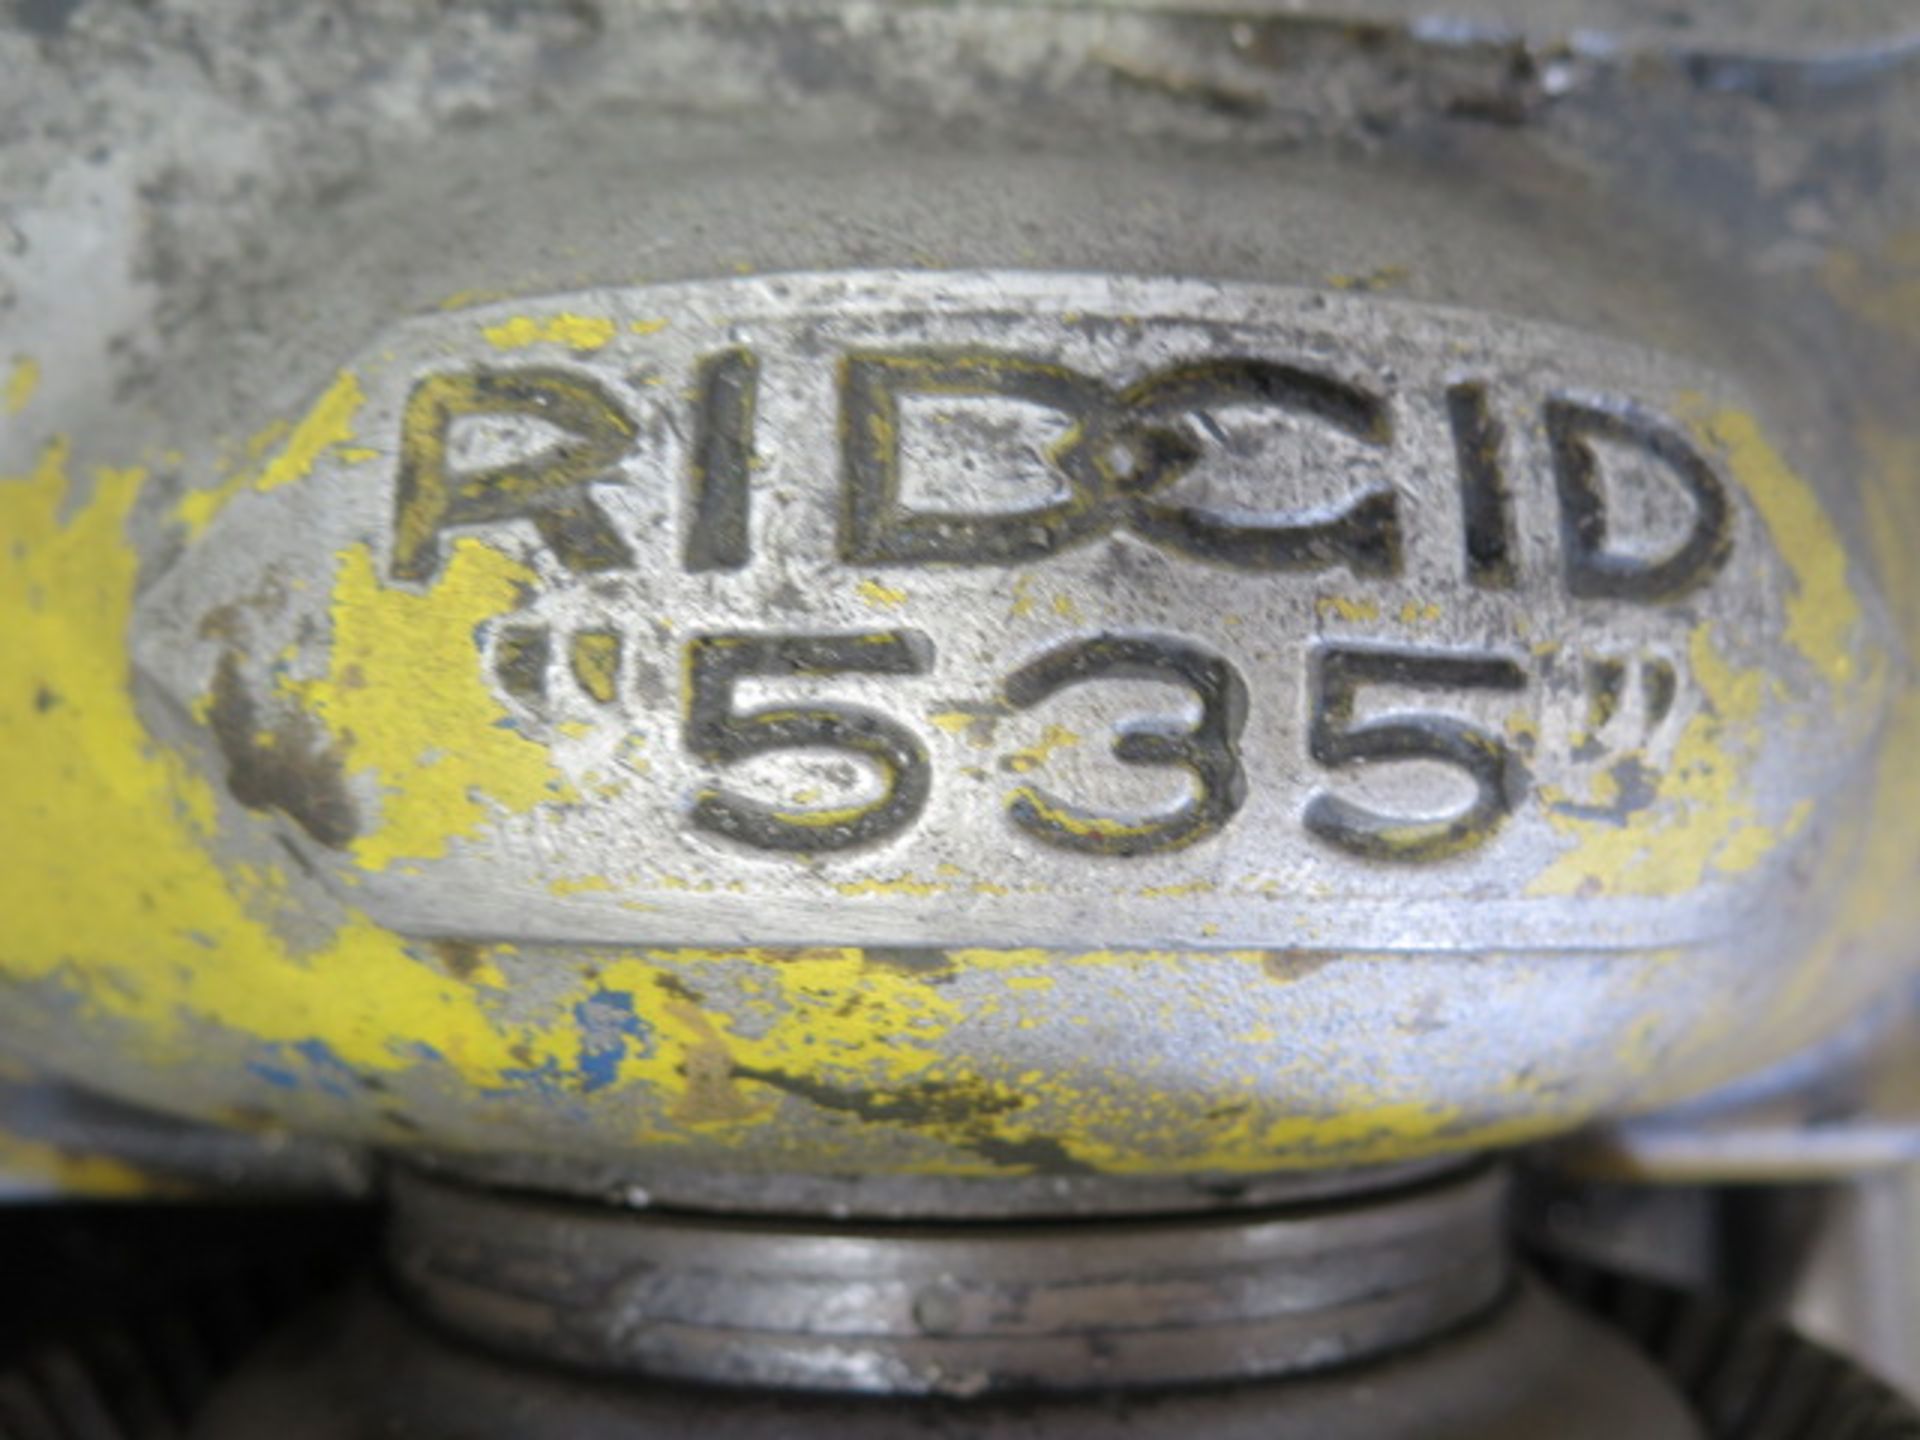 Ridgid mdl. 535 Power Pipe Threader w/ Thread Dies, Cutoff and Reamer (SOLD AS-IS - NO WARRANTY) - Image 7 of 7